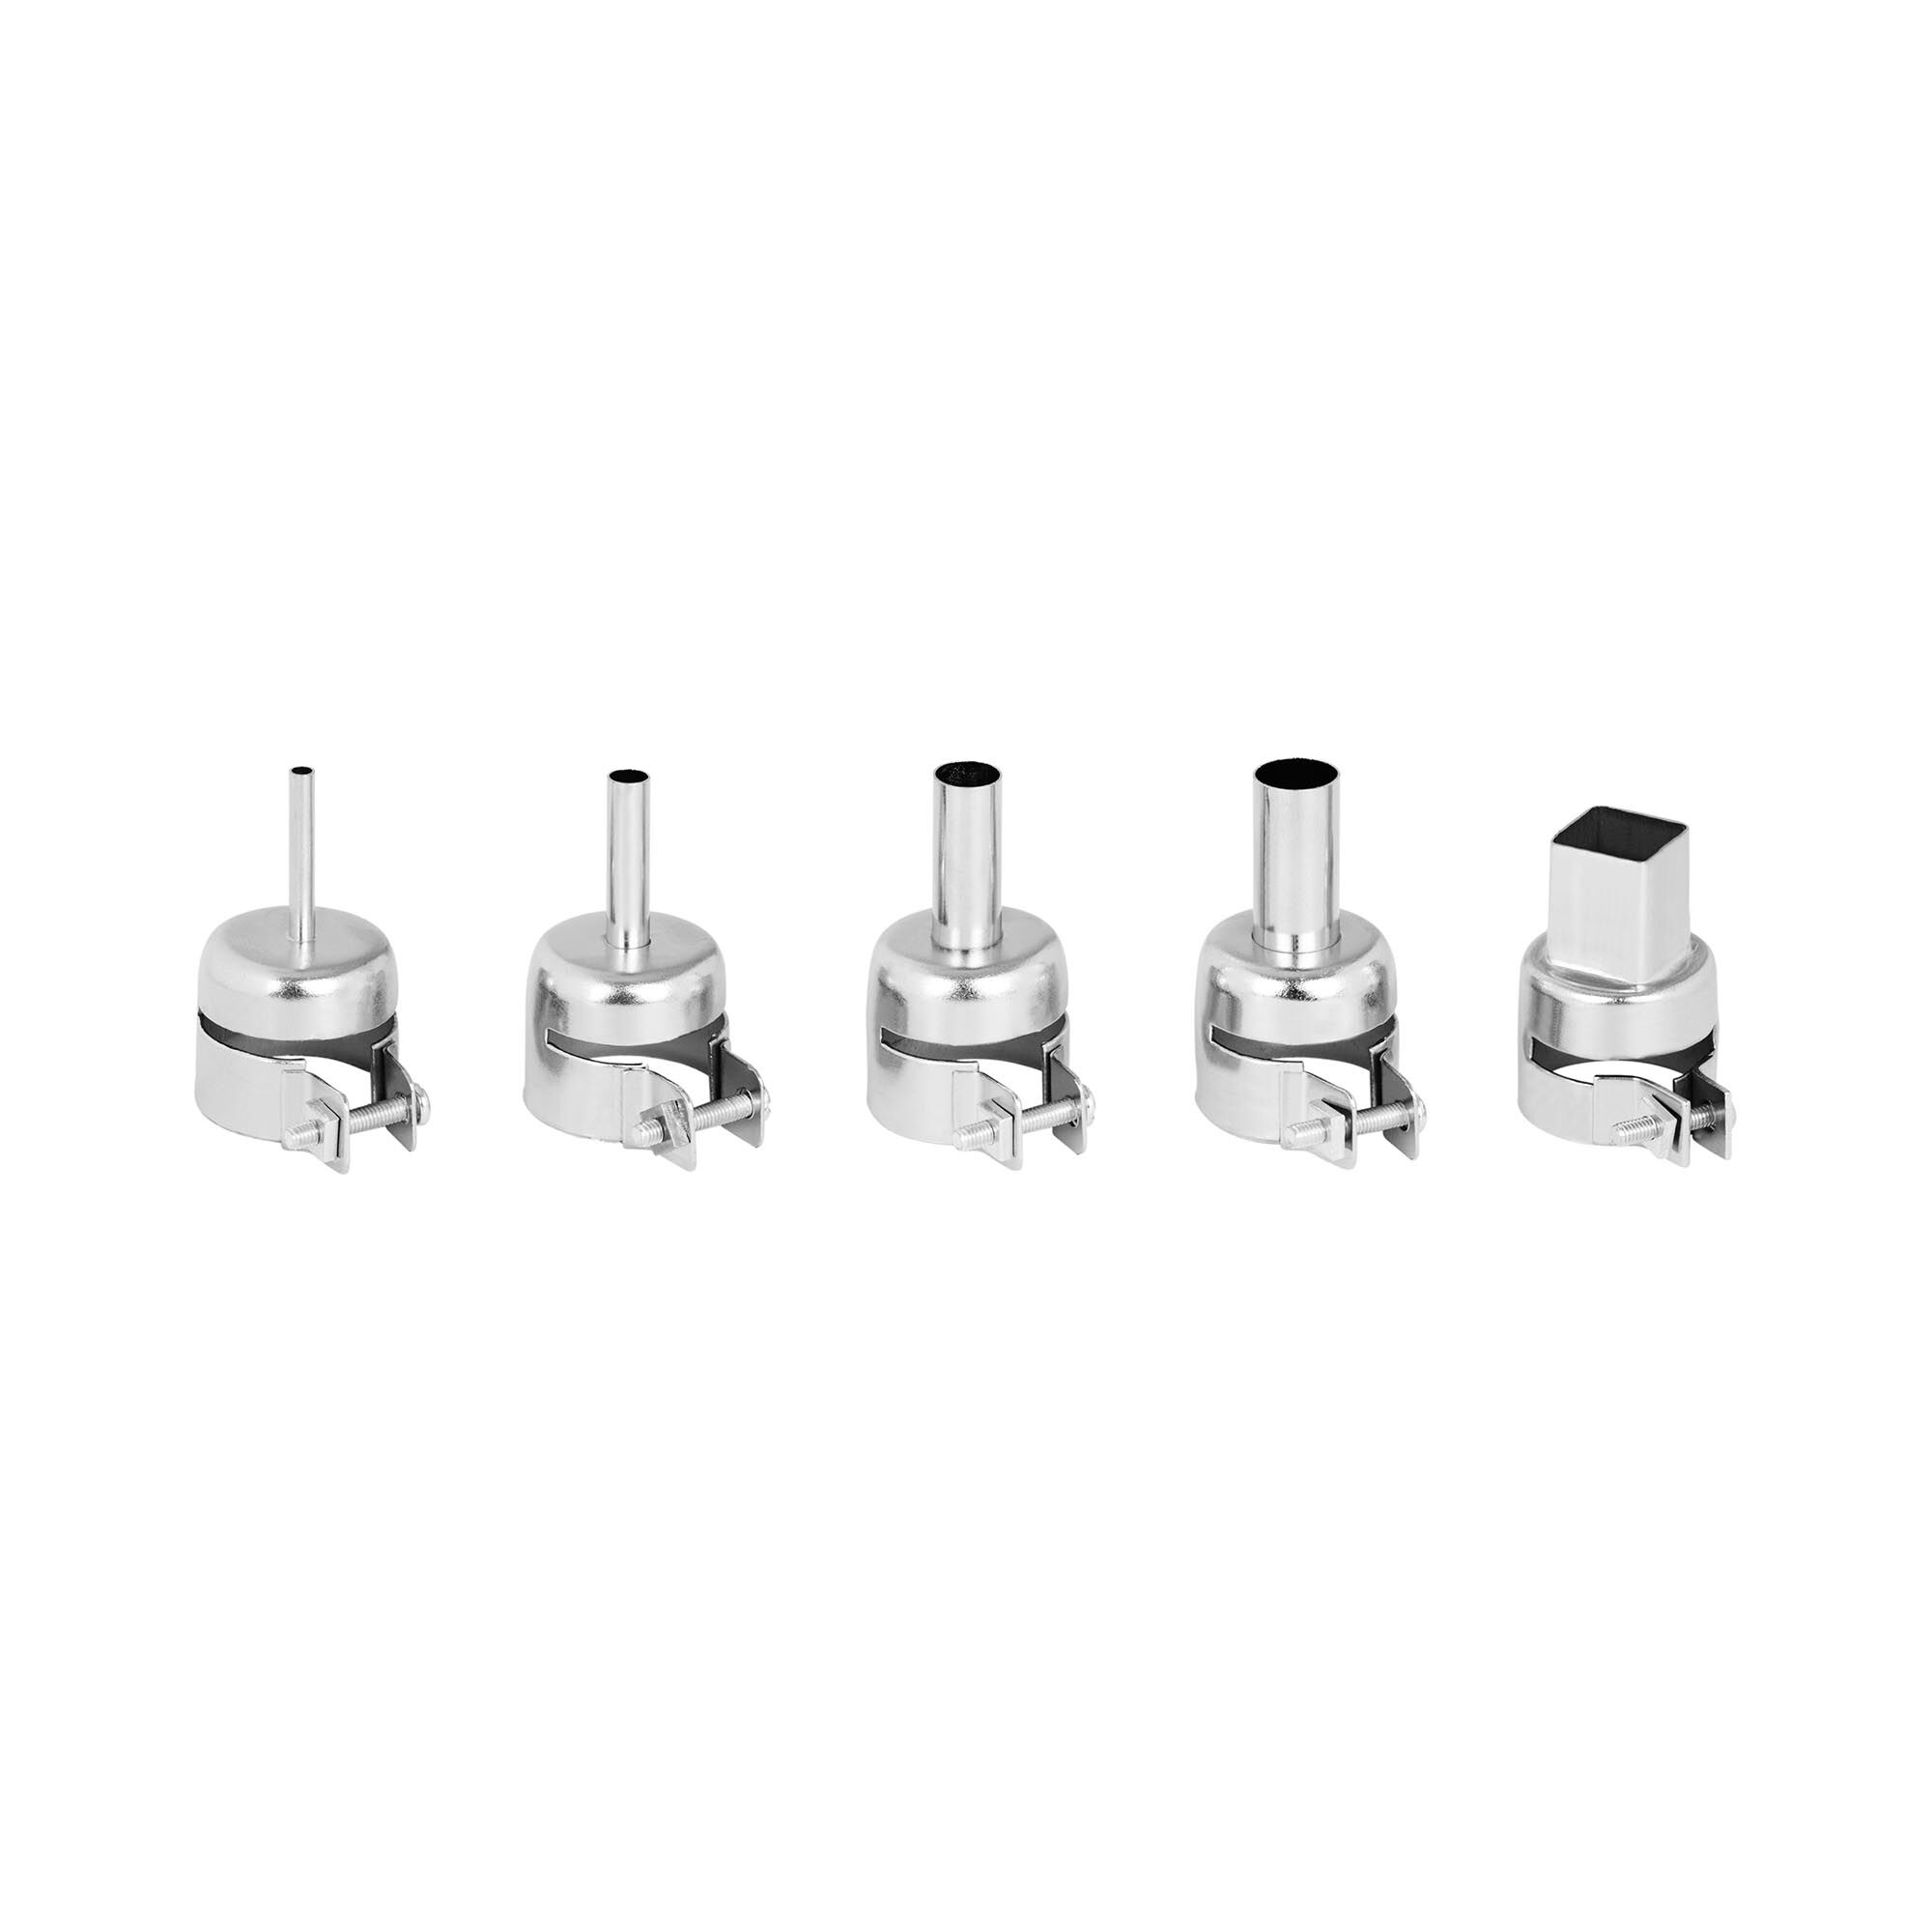 Stamos Soldering Set of 5 Hot Air Nozzles S-LD-5